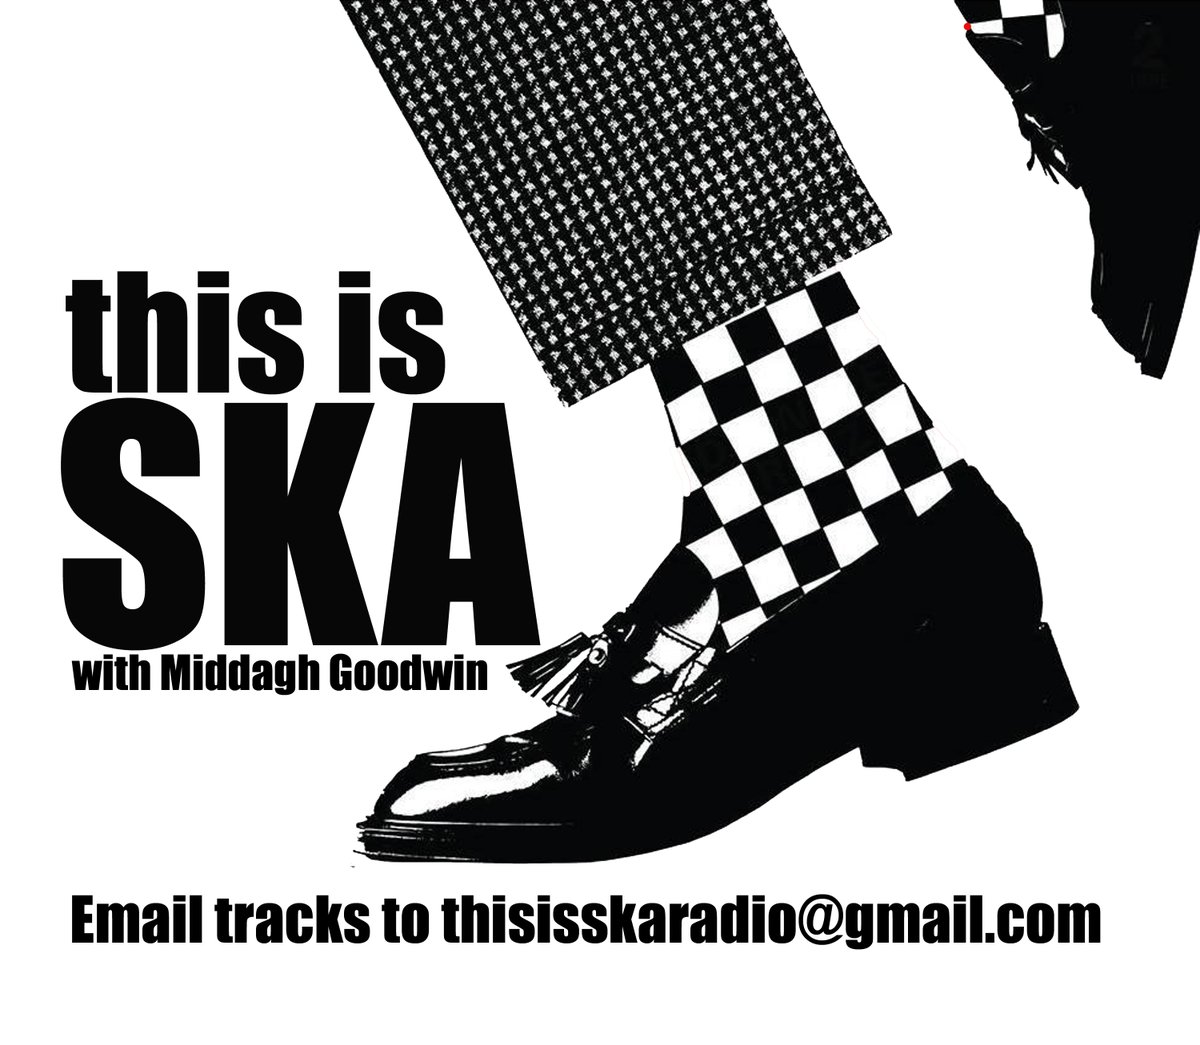 Always looking to play new music, if you would like to hear your songs played on over 5 dozen stations worldwide email thisisskaradio@gmail.com Click on the link for a list of 80+ other DJs & podcasters docs.google.com/spreadsheets/d…